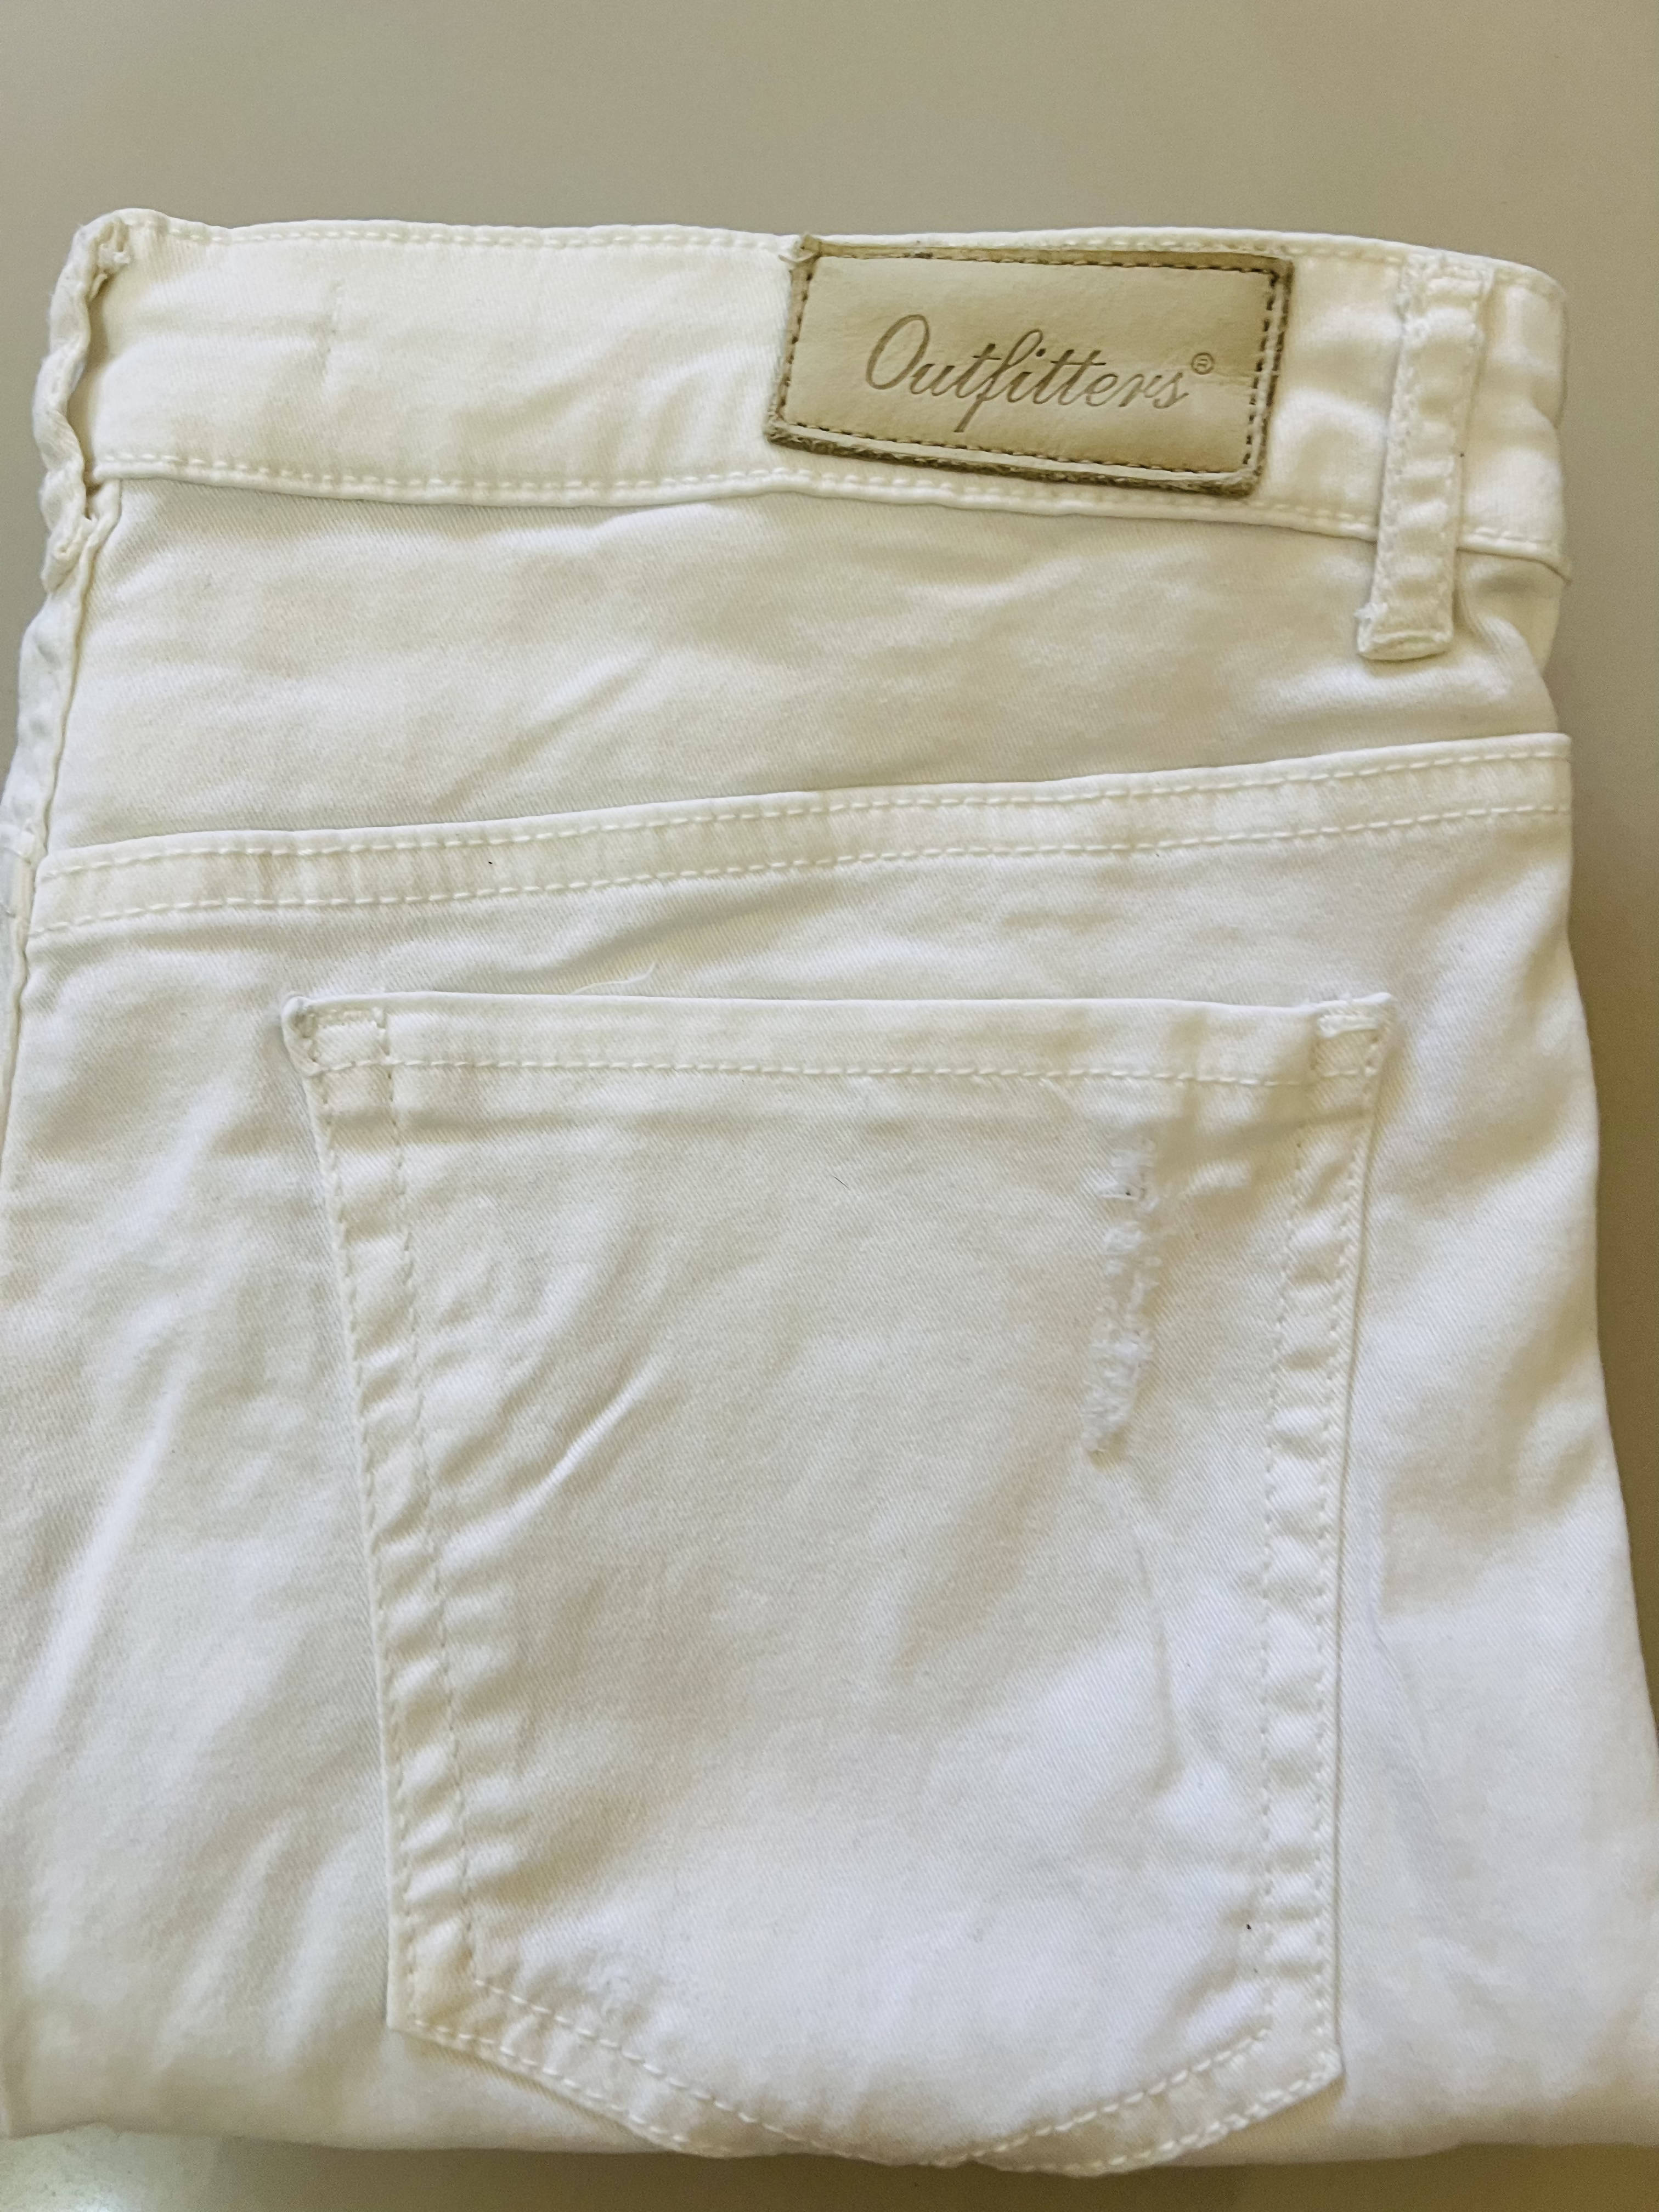 Outfitters | White women Cropped jeans | Women Bottoms & Pants | Preloved